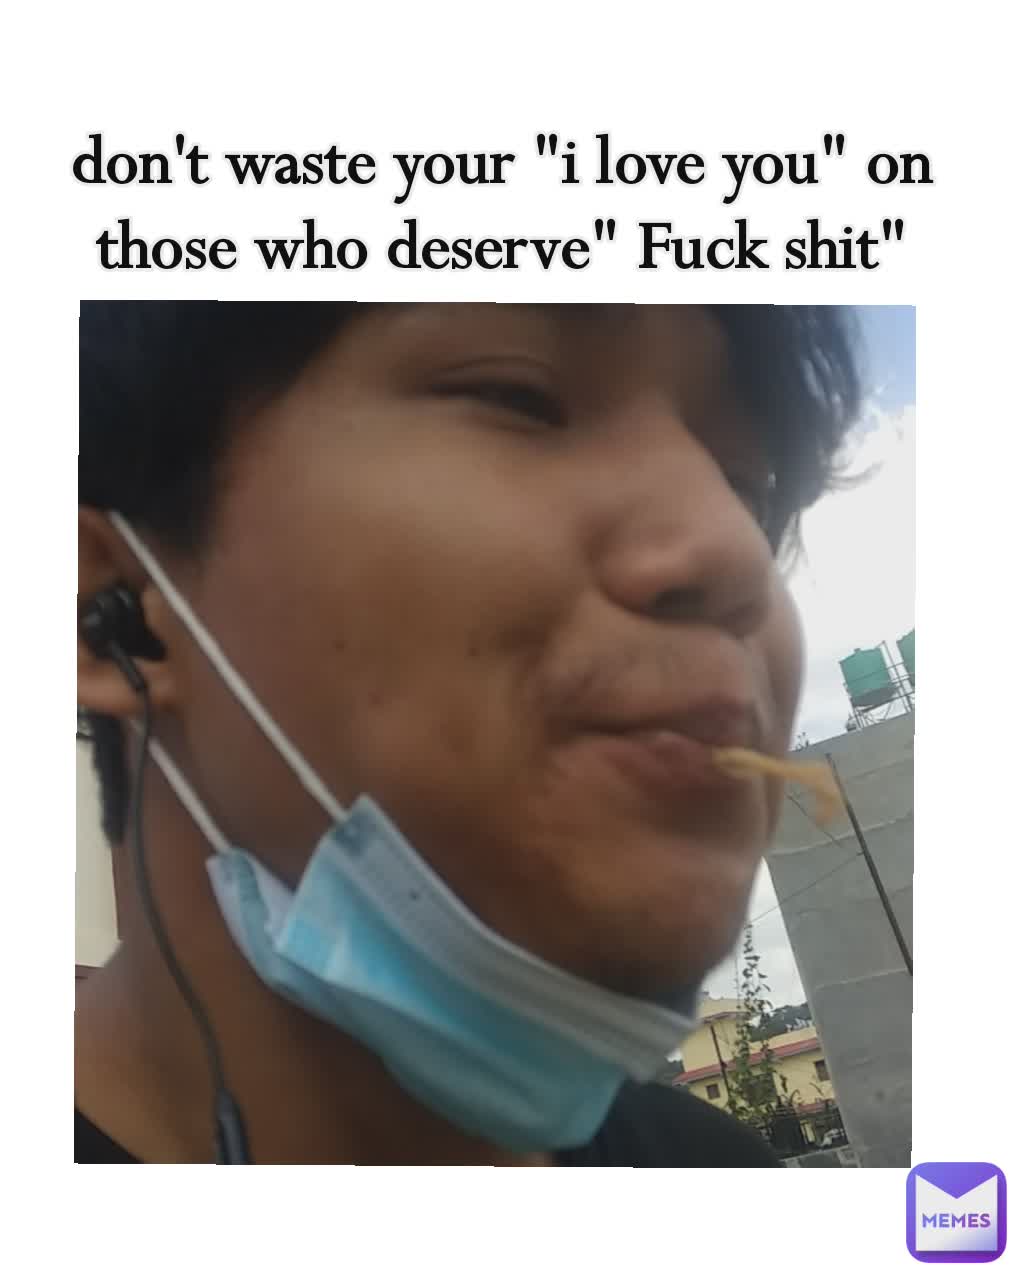 don't waste your "i love you" on those who deserve" Fuck shit"